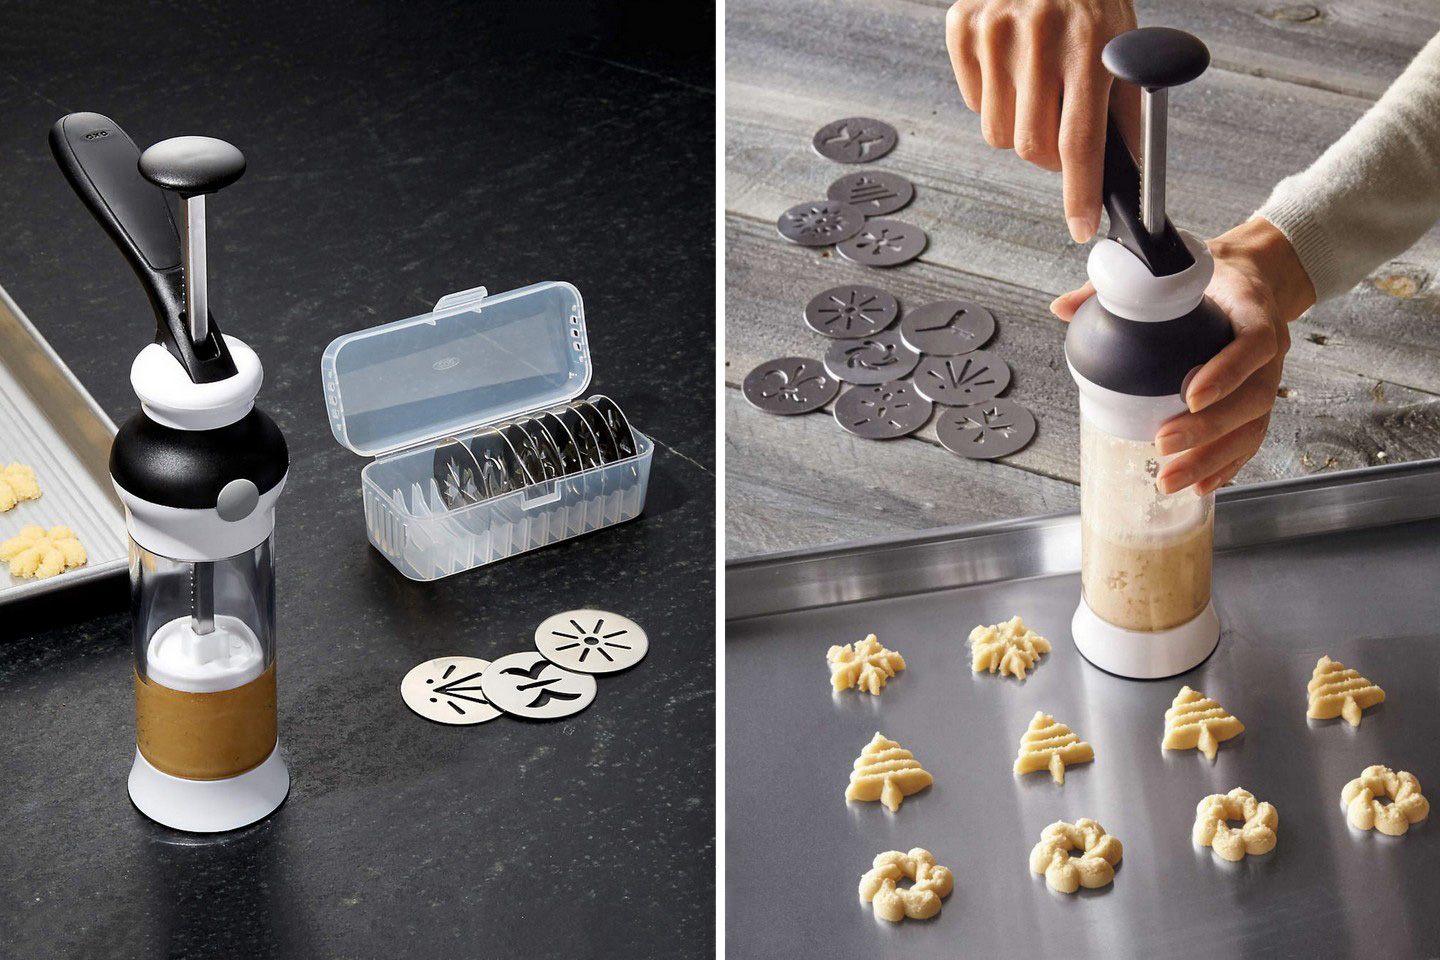 https://www.yankodesign.com/images/design_news/2021/12/the-oxo-cookie-press-lets-you-easily-pump-out-a-whole-bunch-of-perfectly-shaped-holiday-themed-cookies/oxo_cookie_press_2021_6.jpg